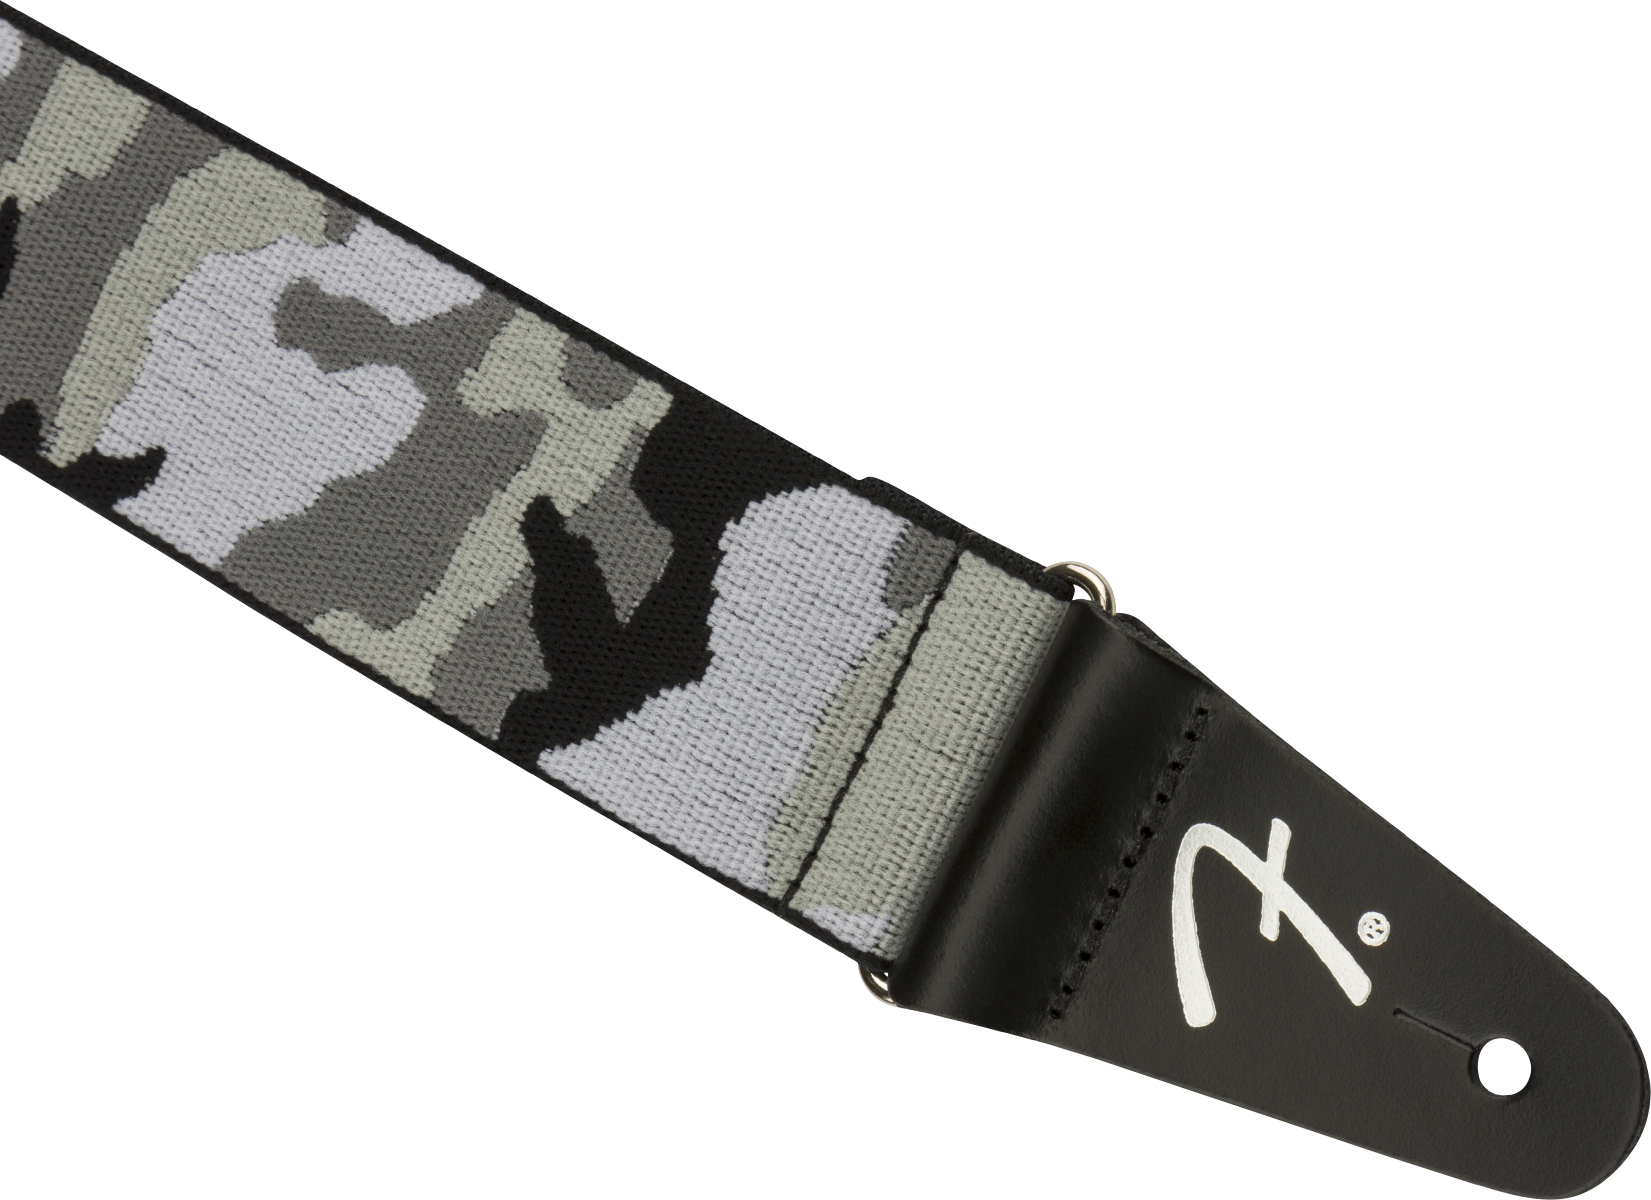 Fender Weighless 2 Inches Camo Guitar Strap Gray - Correa - Variation 1